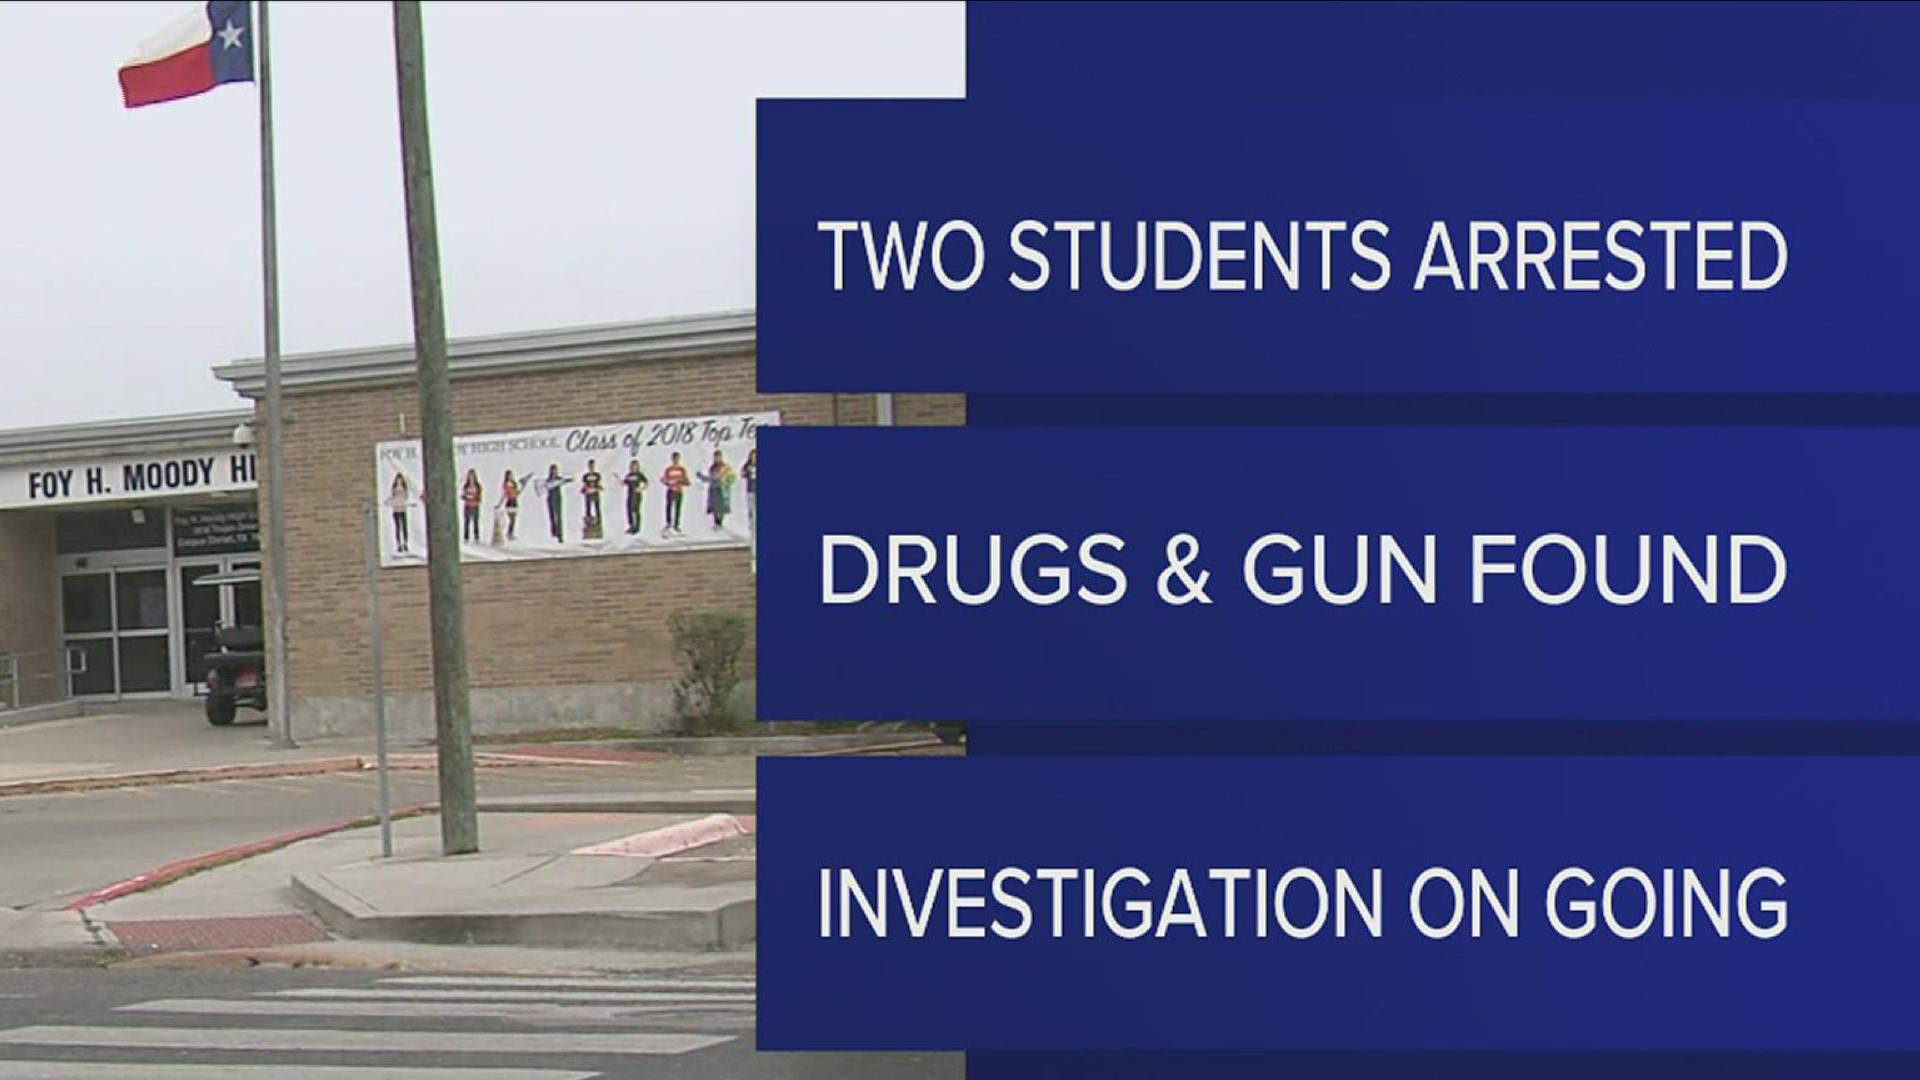 Both students have since been charged with unlawful carrying of a firearm.